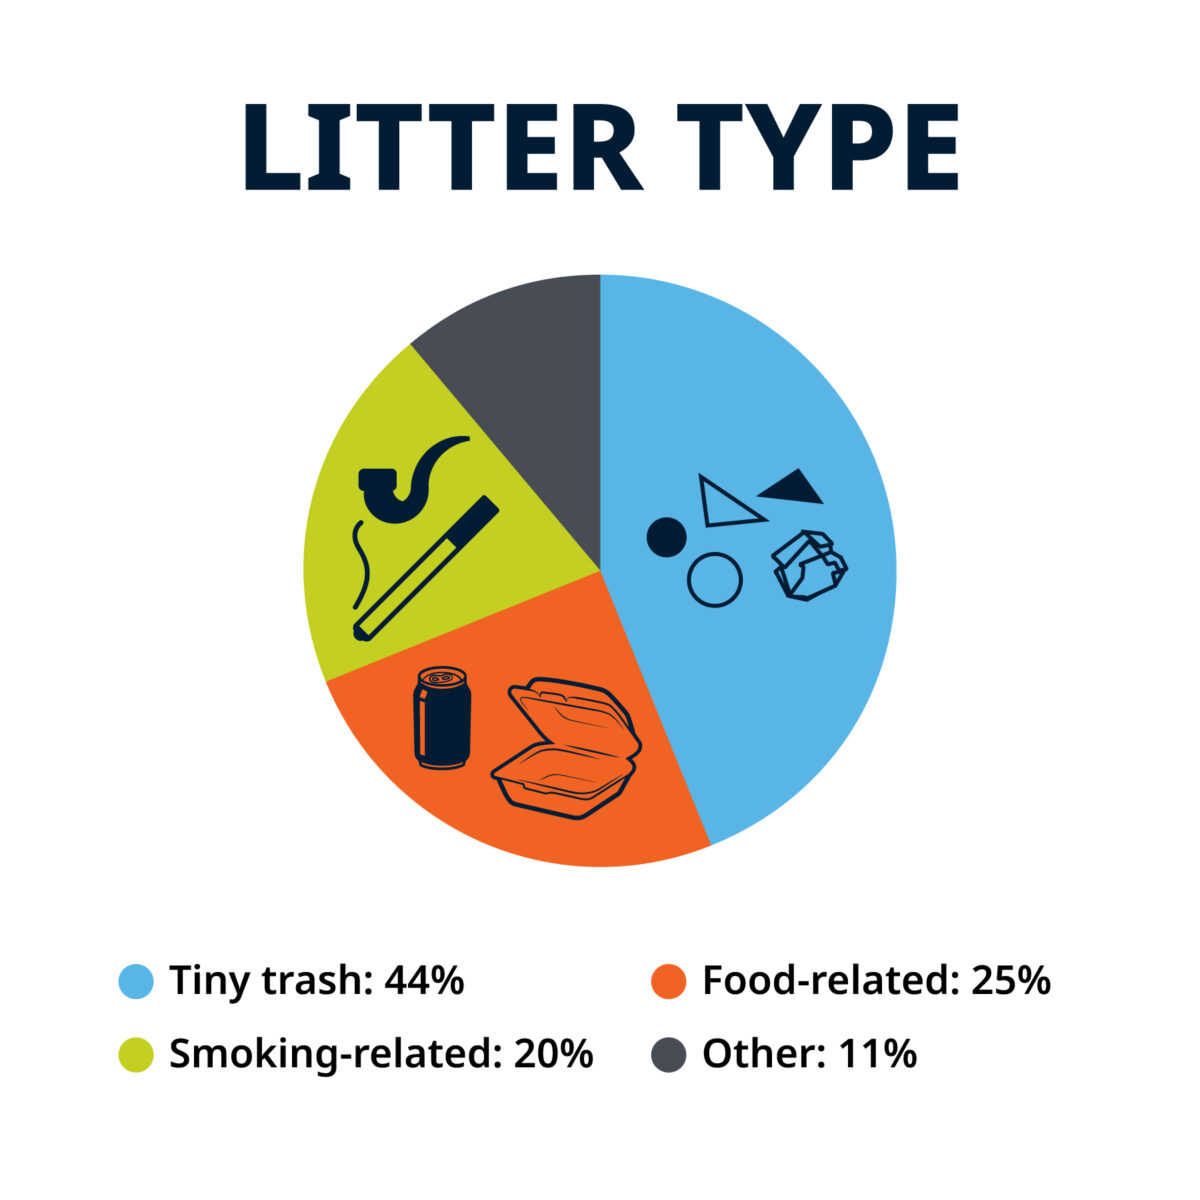 Litter type. Tiny trash: 44%. Food-related: 25%. Smoking-related: 20%. Other: 11%.